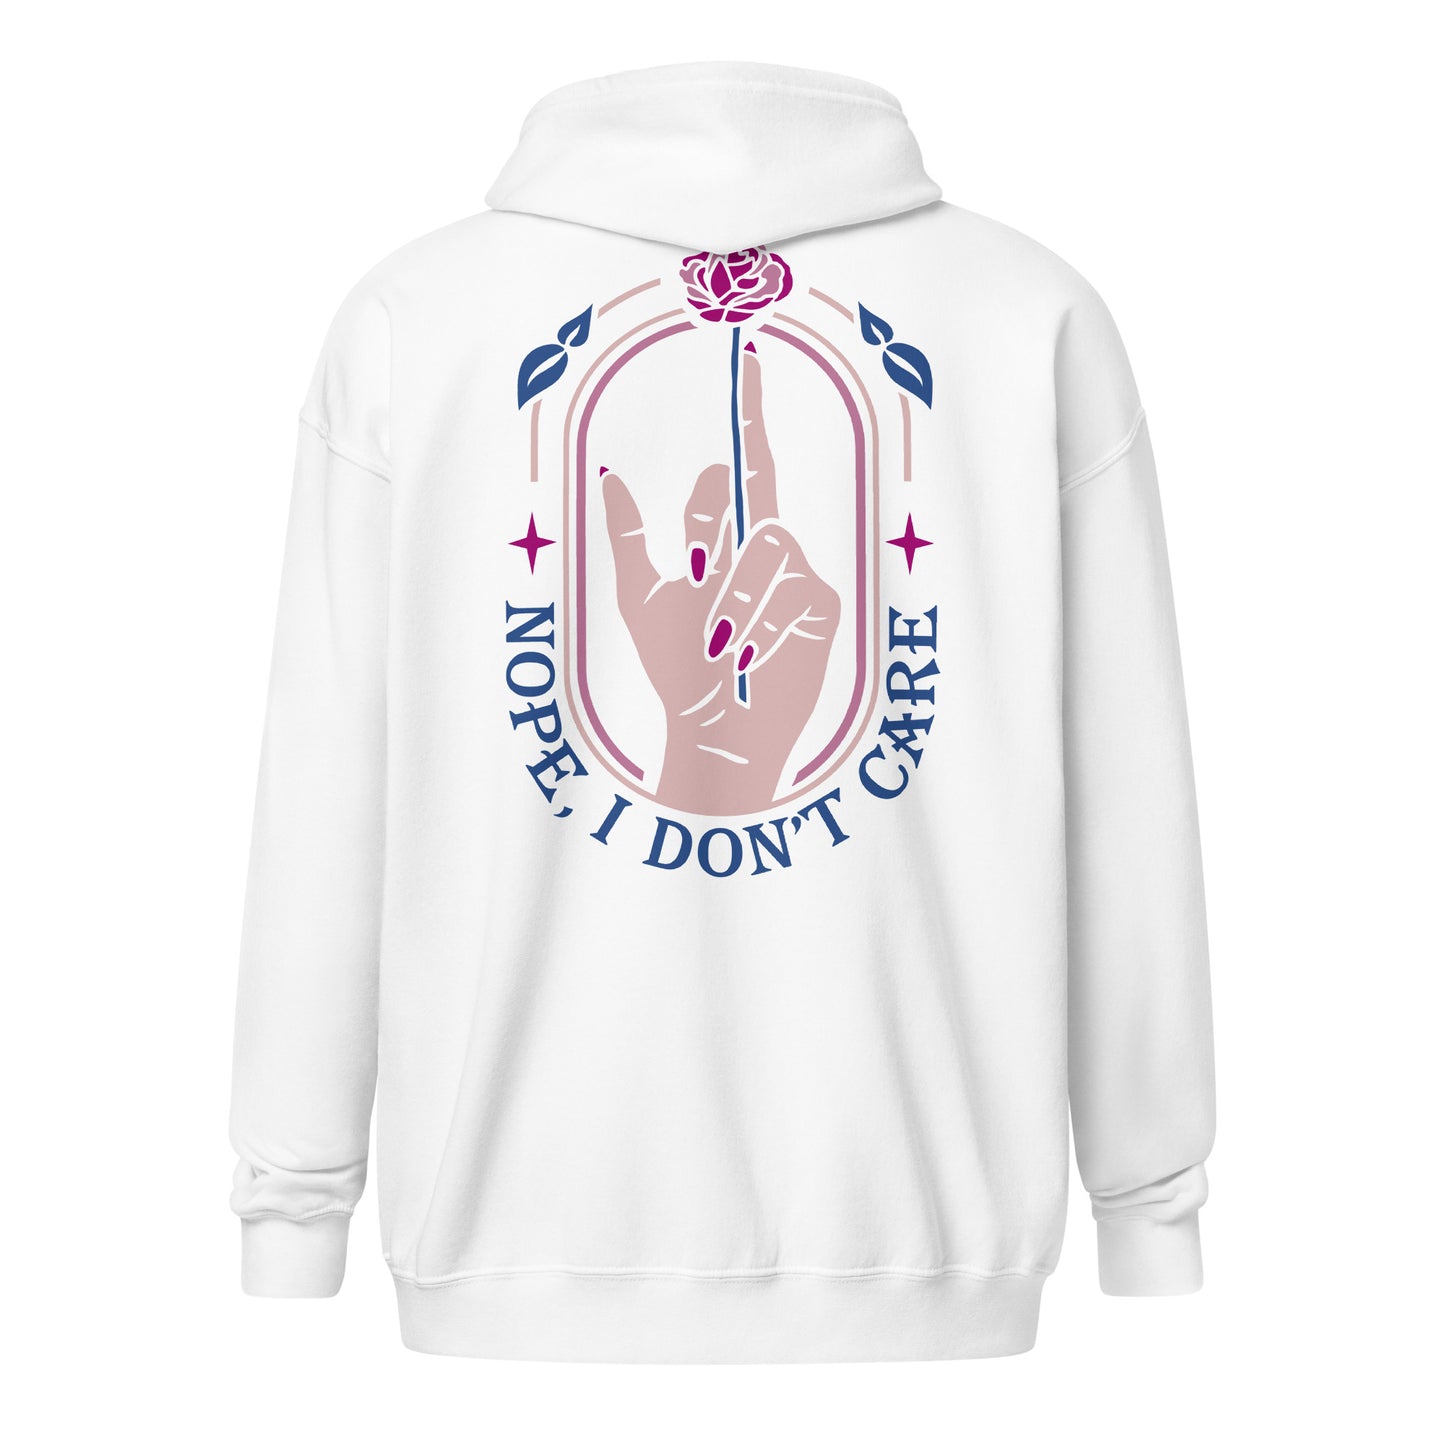 "I don´t care" women's hoodie with zipper